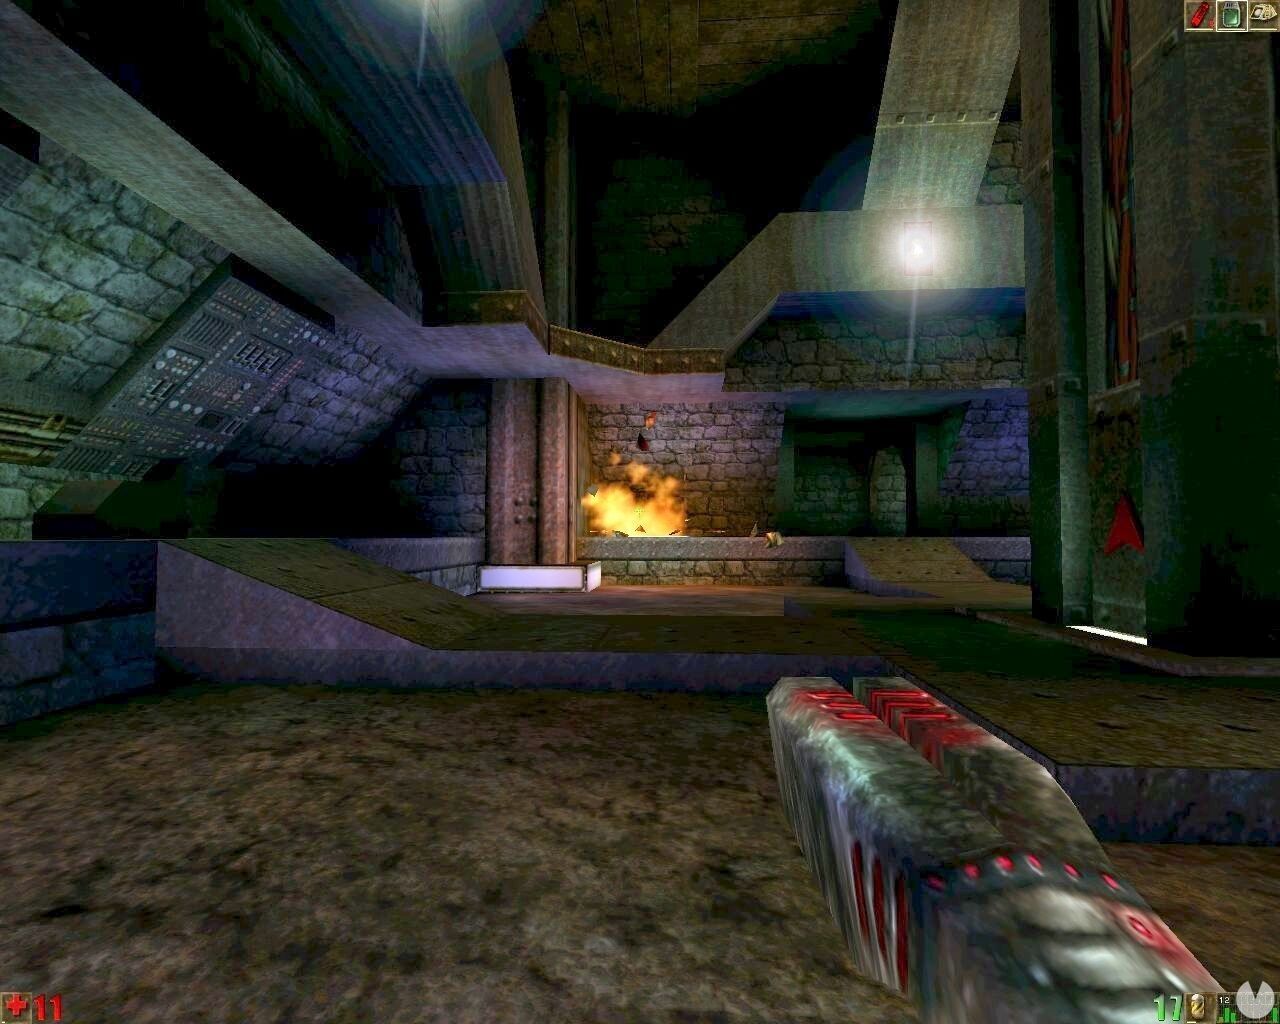 Unreal gold. Unreal игра 1998. Unreal 1 игра. Unreal Gold 1999.